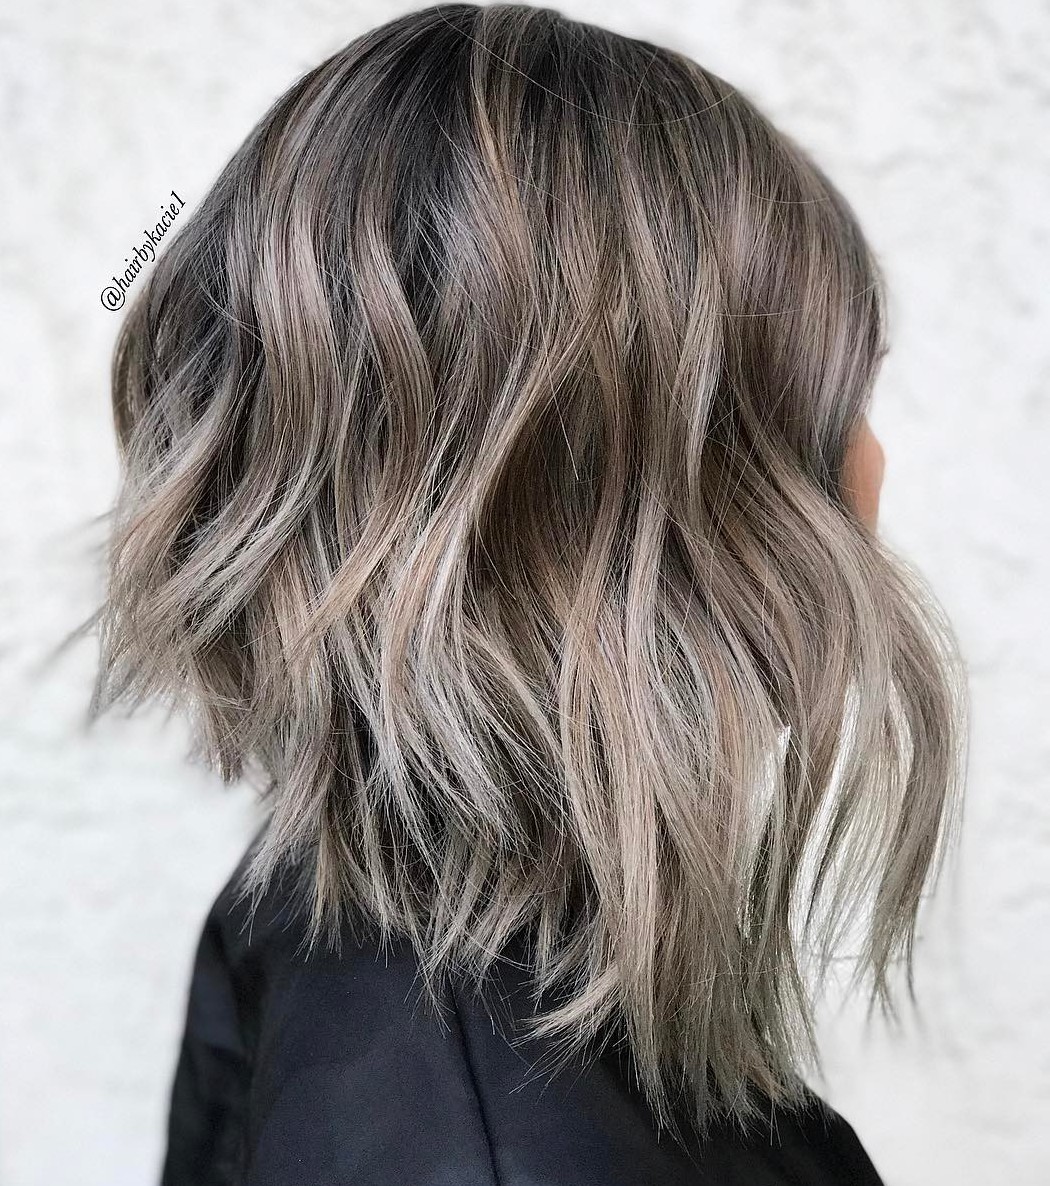 25 Fresh Medium Length Hairstyles for Thick Hair to Enjoy in 2022